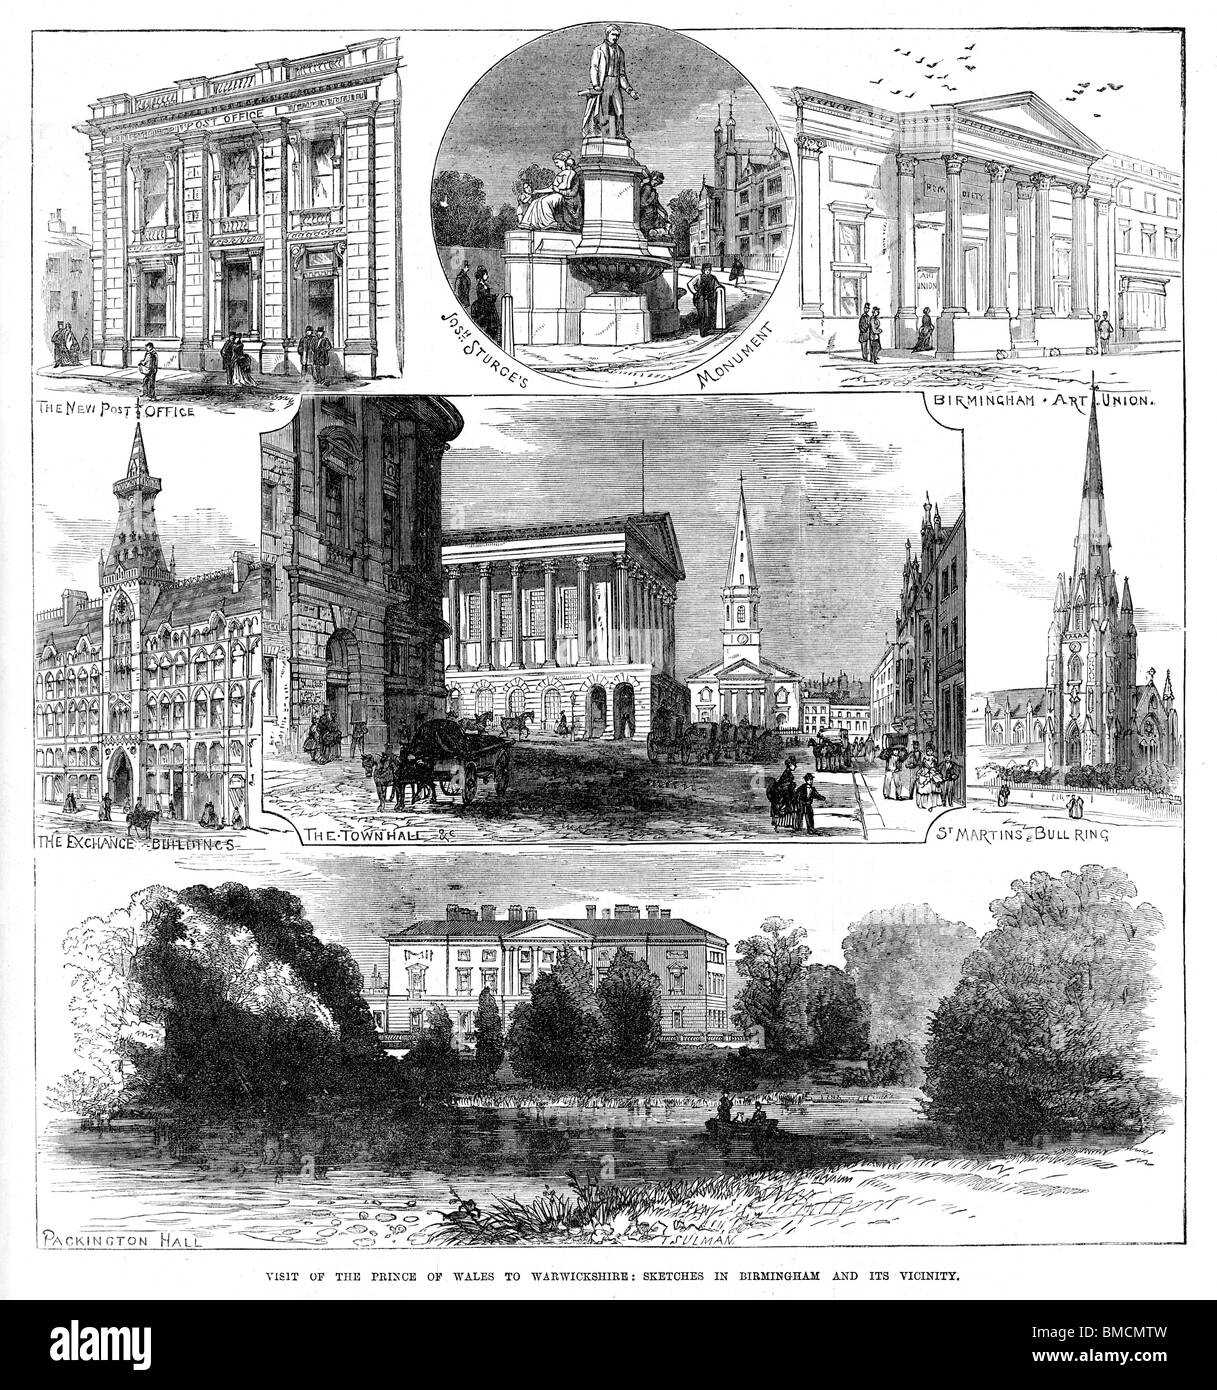 Birmingham and Vicinity, 1874 engraving of scenes in Englands Second City to celebrate the visit of the Prince of Wales Stock Photo